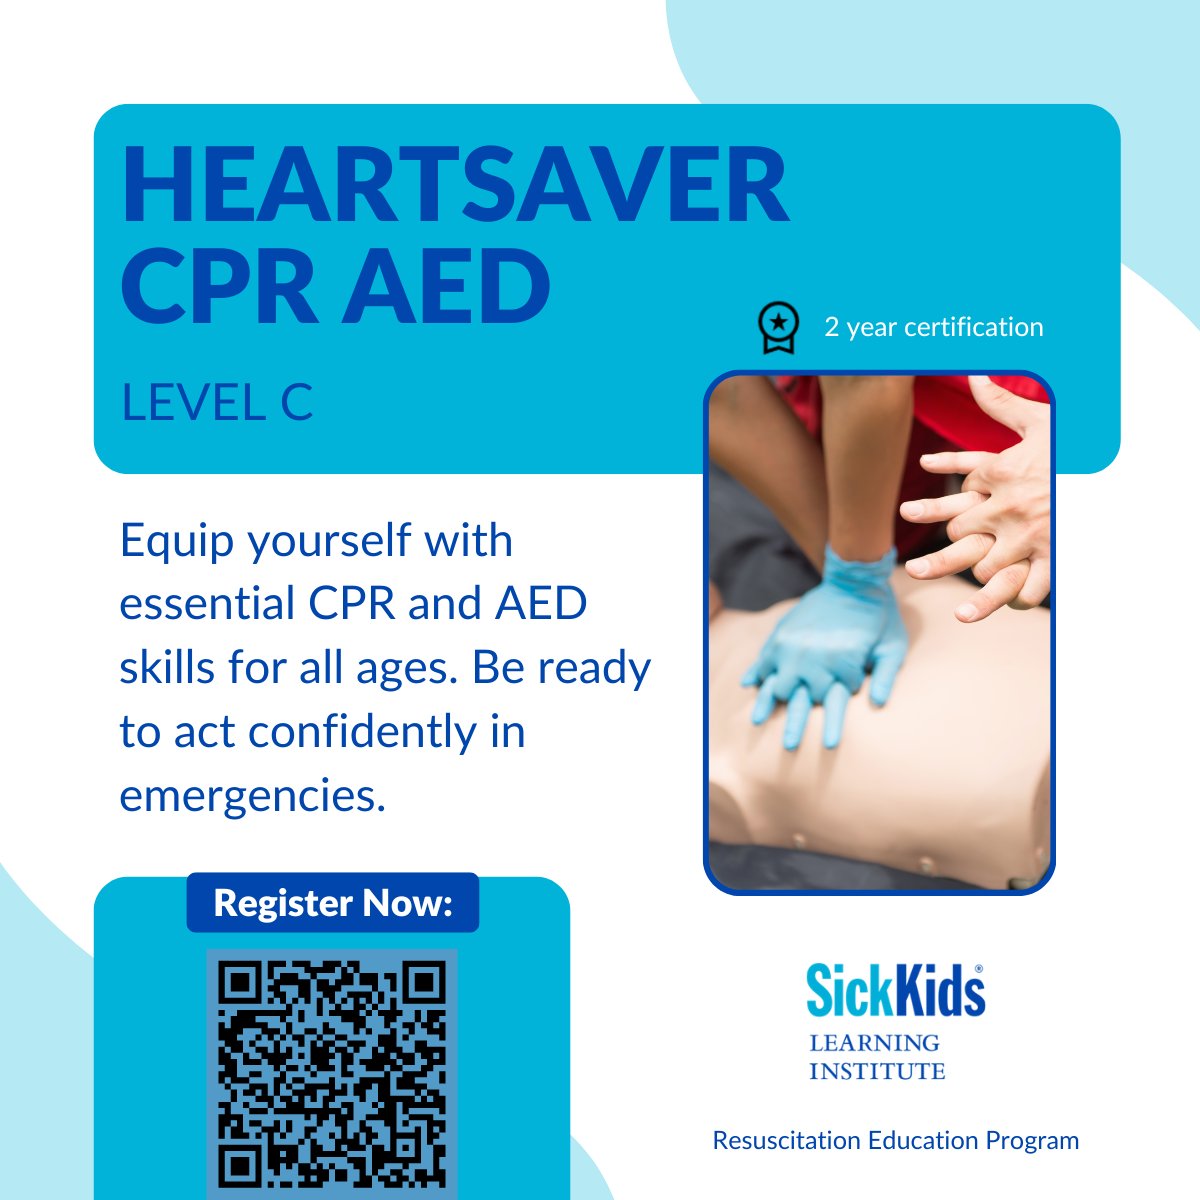 Equip yourself with essential #CPR and #AED skills for all ages. Be ready to act confidently in emergencies. Join us on June 18 at the SimKIDS’ Simulation Centre for this vital training. Secure your spot ➡️ bit.ly/4amEc99 #Heartsaver #SKLearning